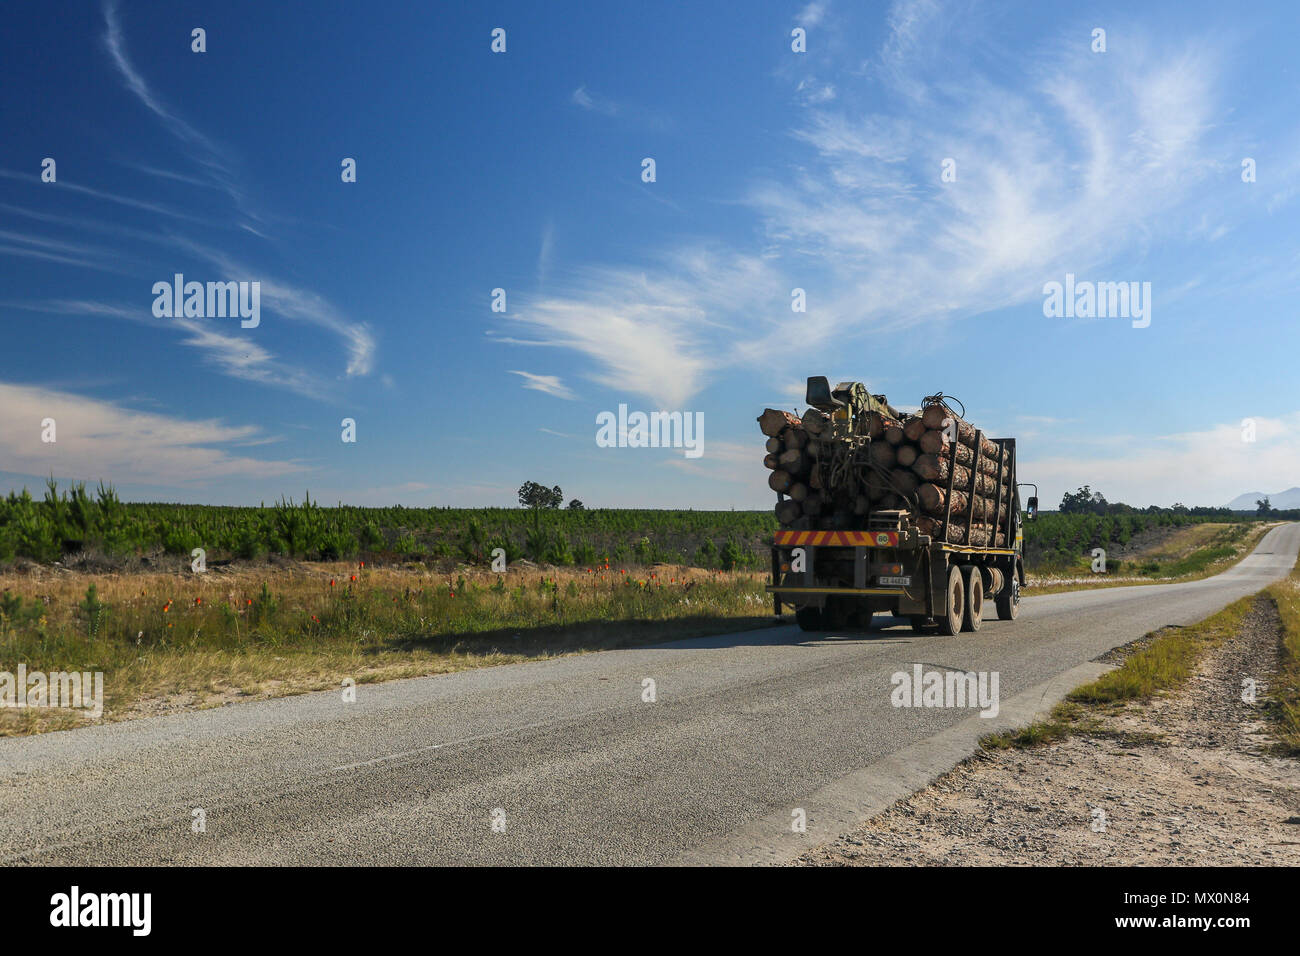 Lorry transporting pine trees to Coldstream lumber yard, tsitsikamma national park, garden route, south africa Stock Photo